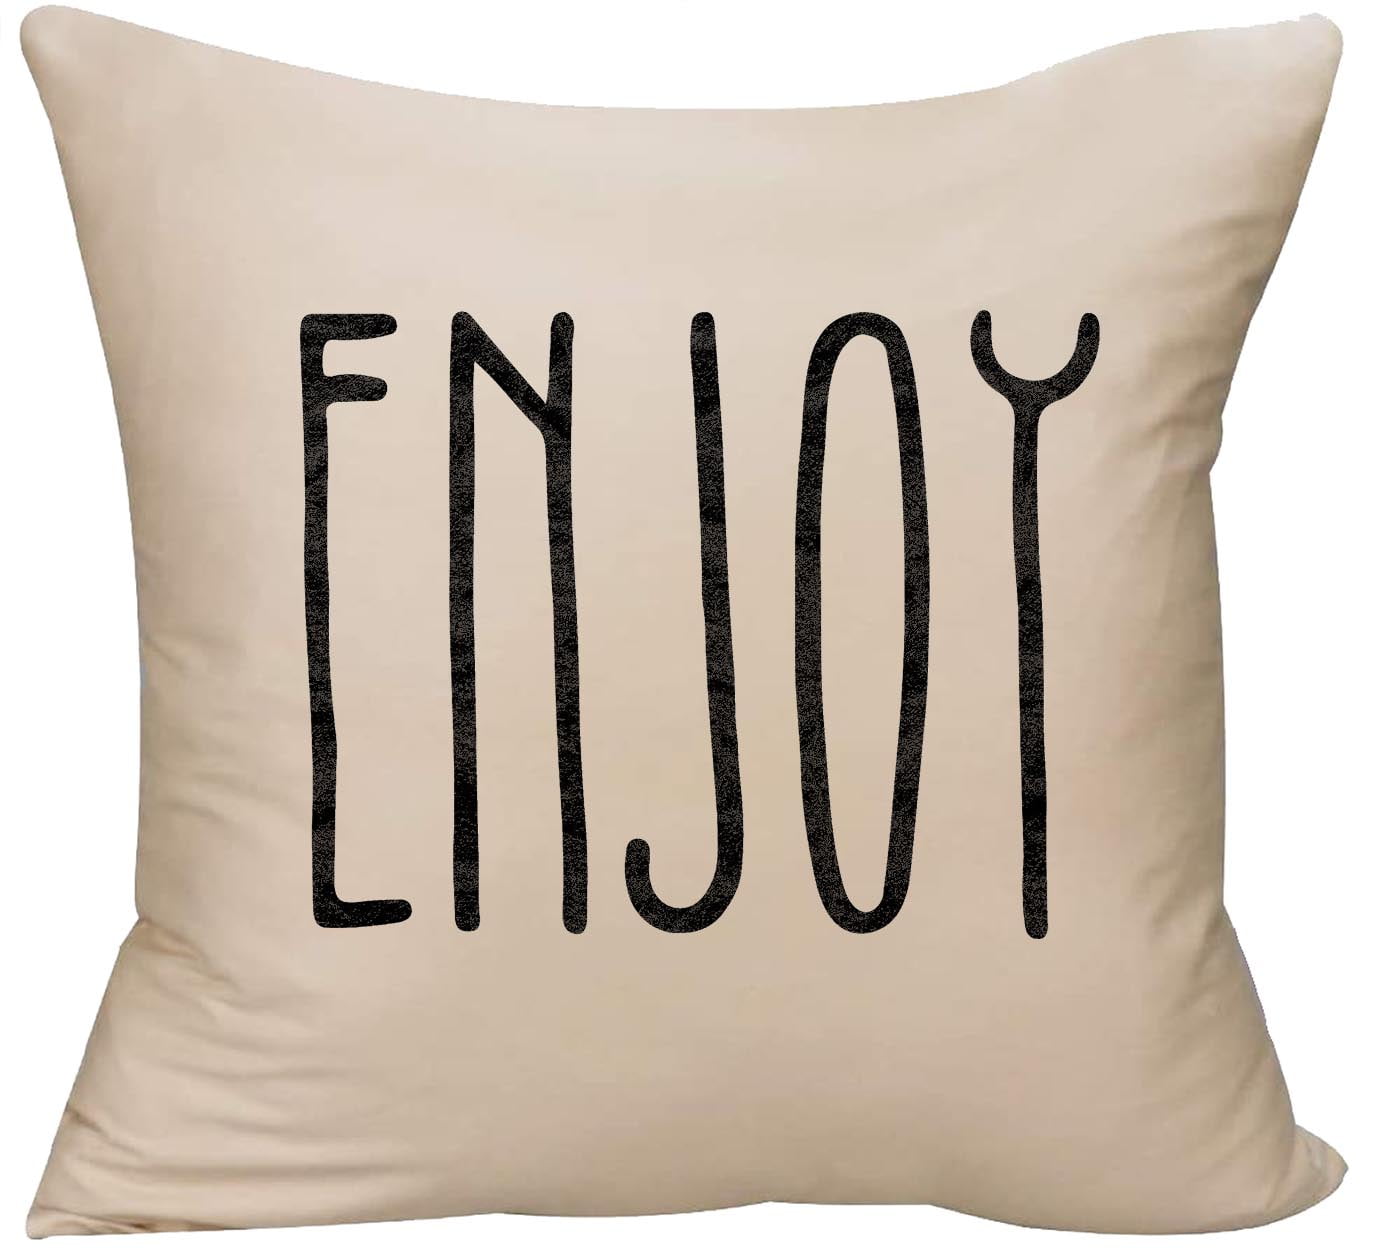 Its A Pleasure To Have Fun With Pillow